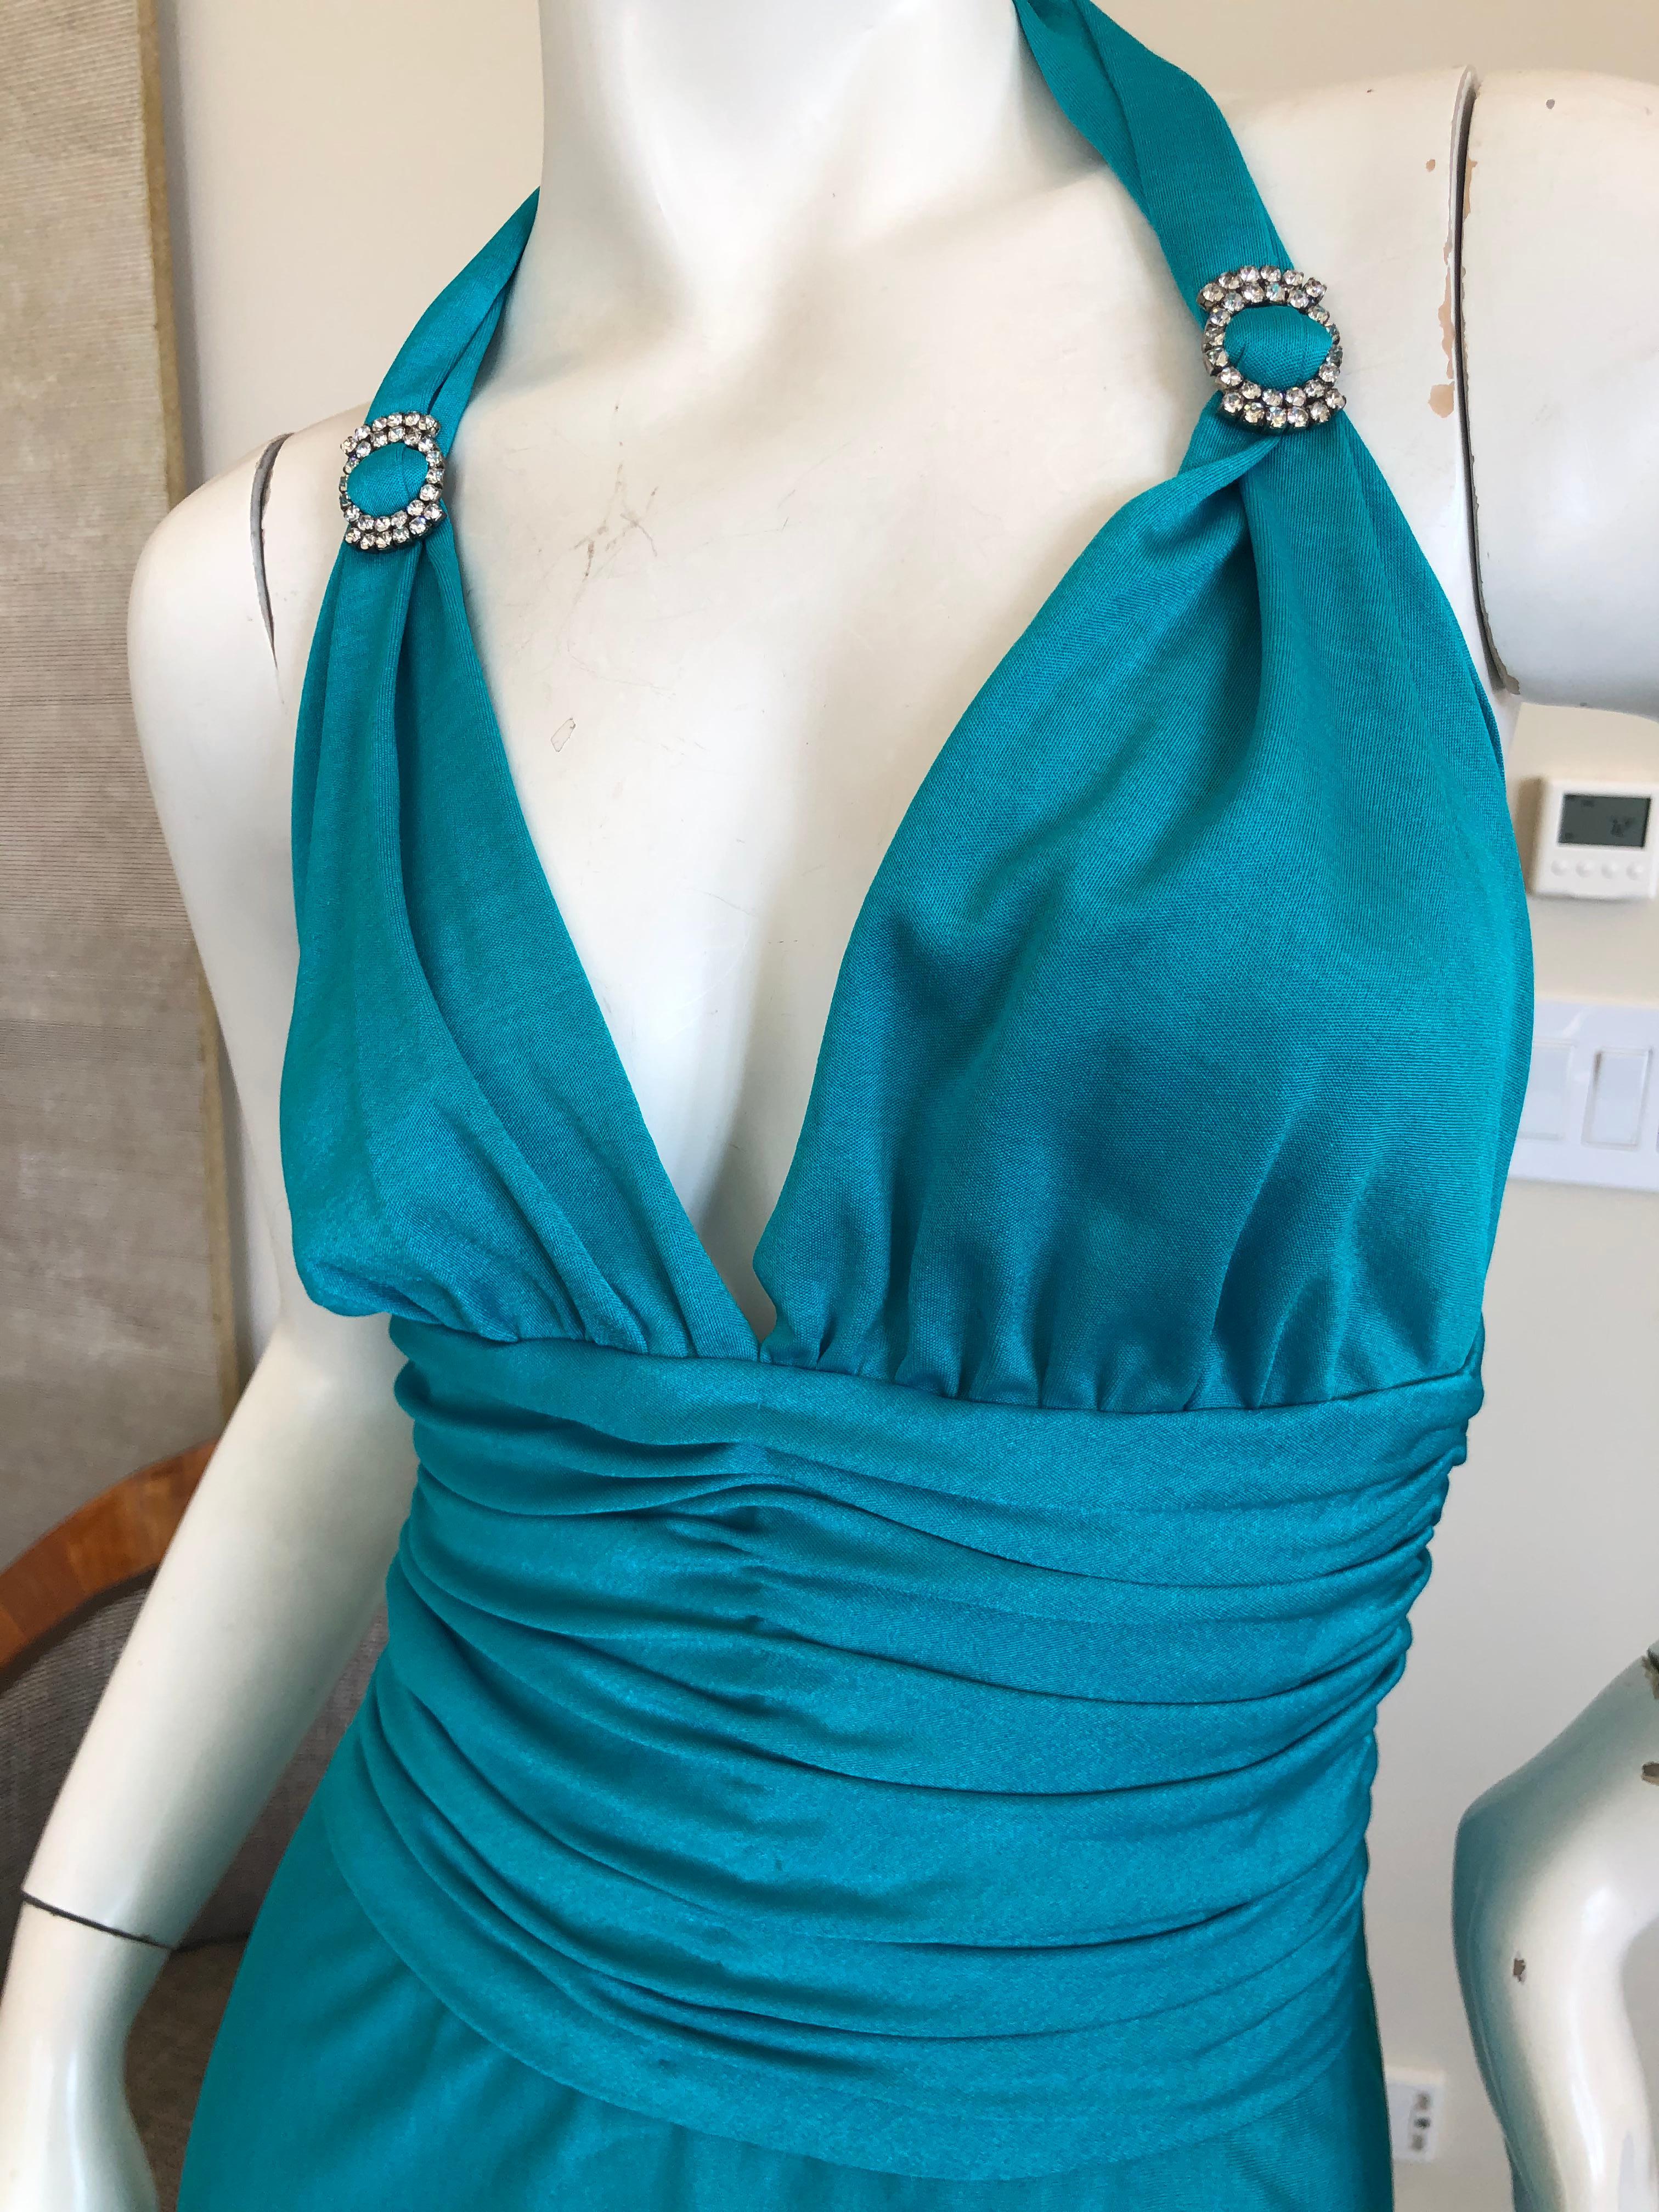 Loris Azzaro Couture 70's Low Cut Blue Cocktail Dress with Crystal Accents For Sale 3